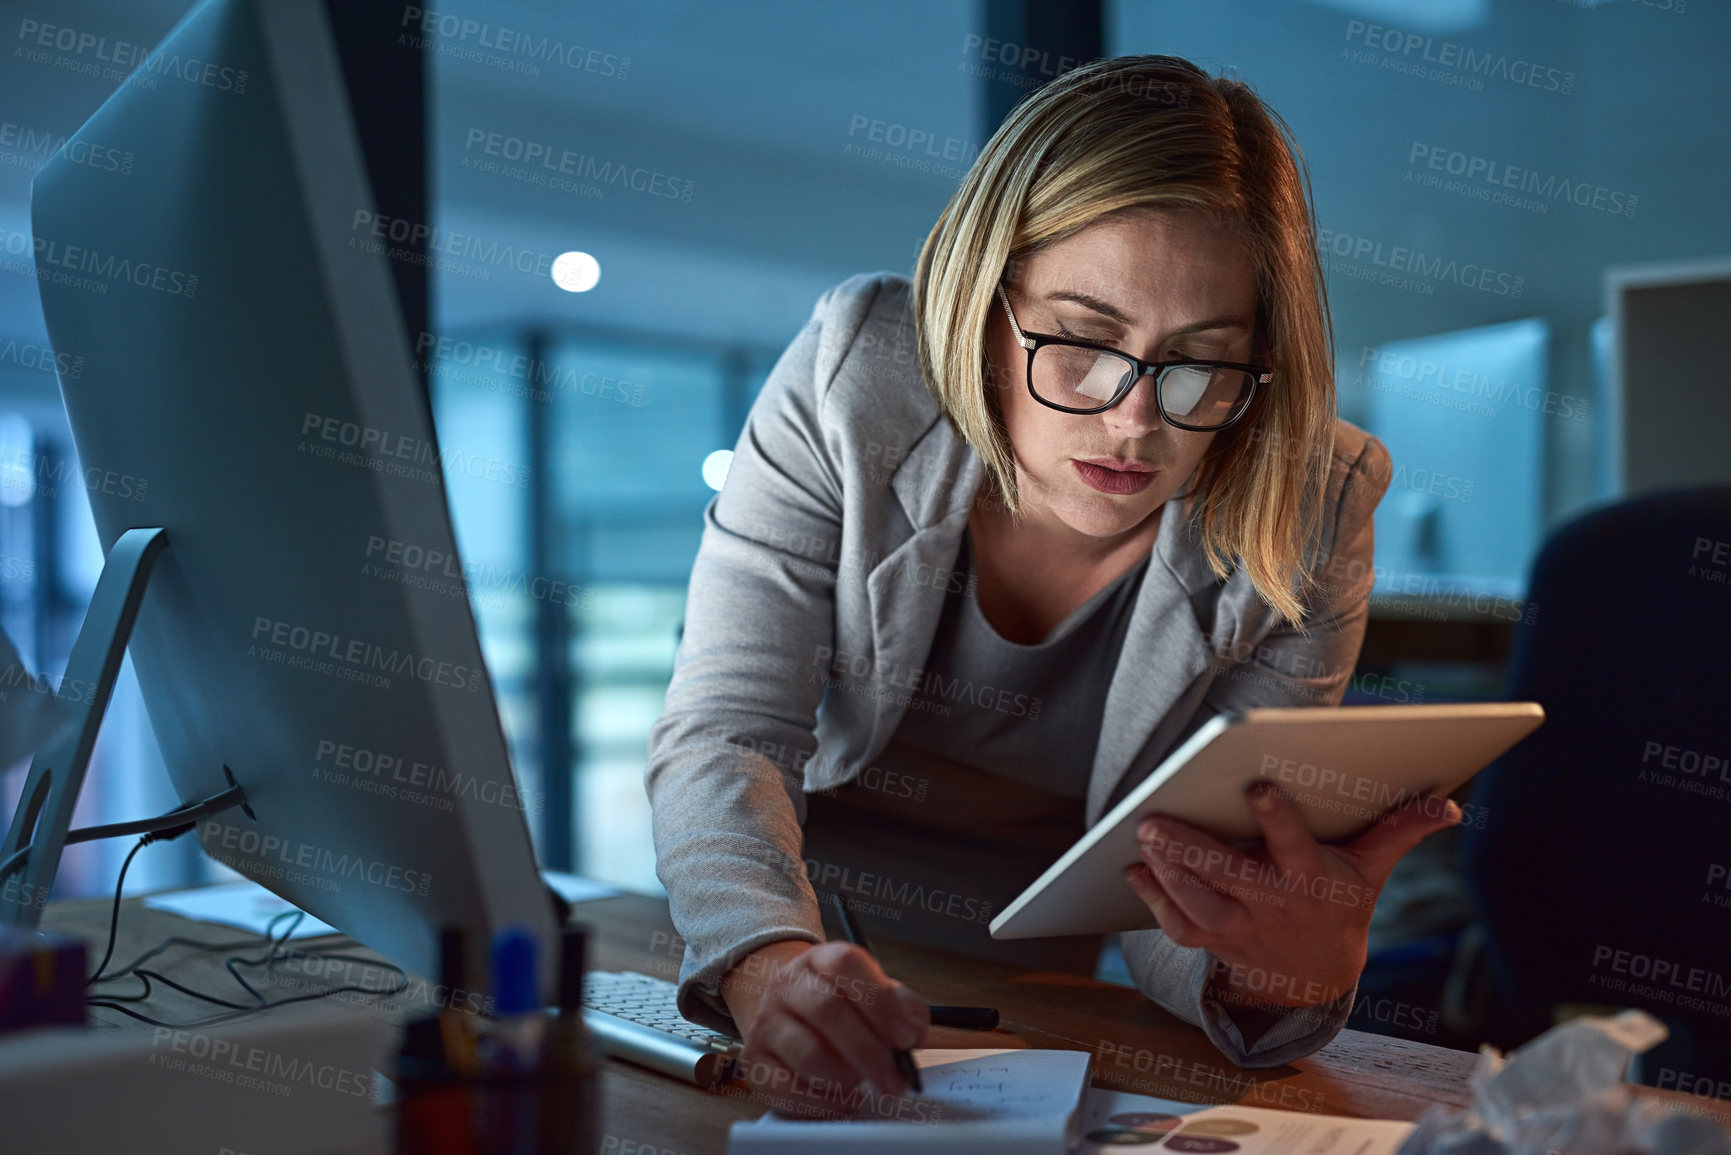 Buy stock photo Cropped shot of a businesswoman working on a digital tablet in her office late into the night